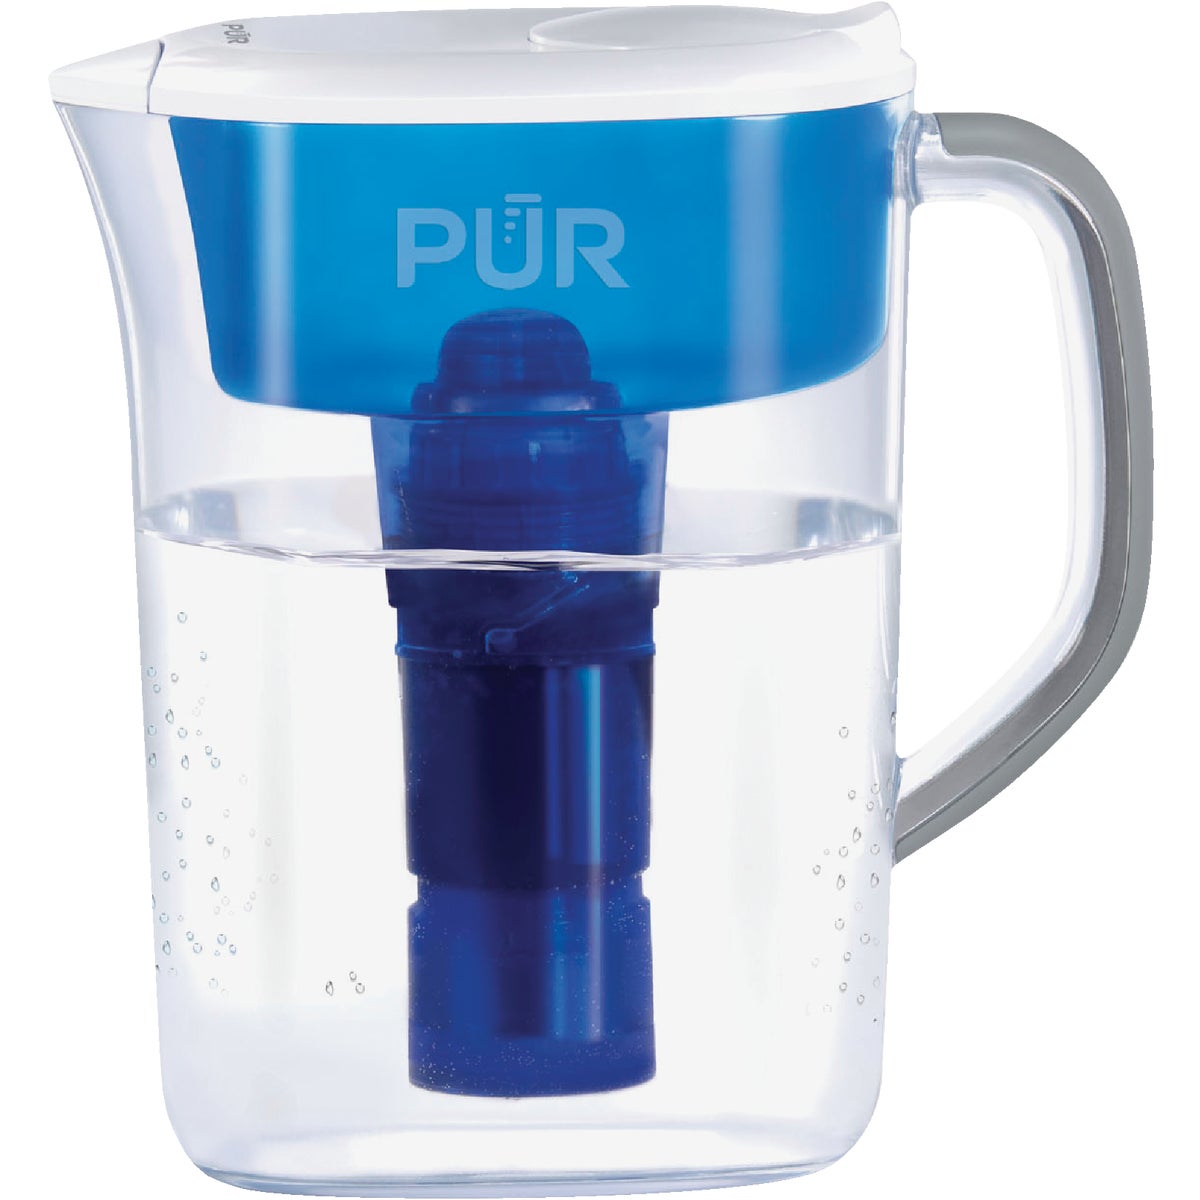 WATER FILTER PITCHER